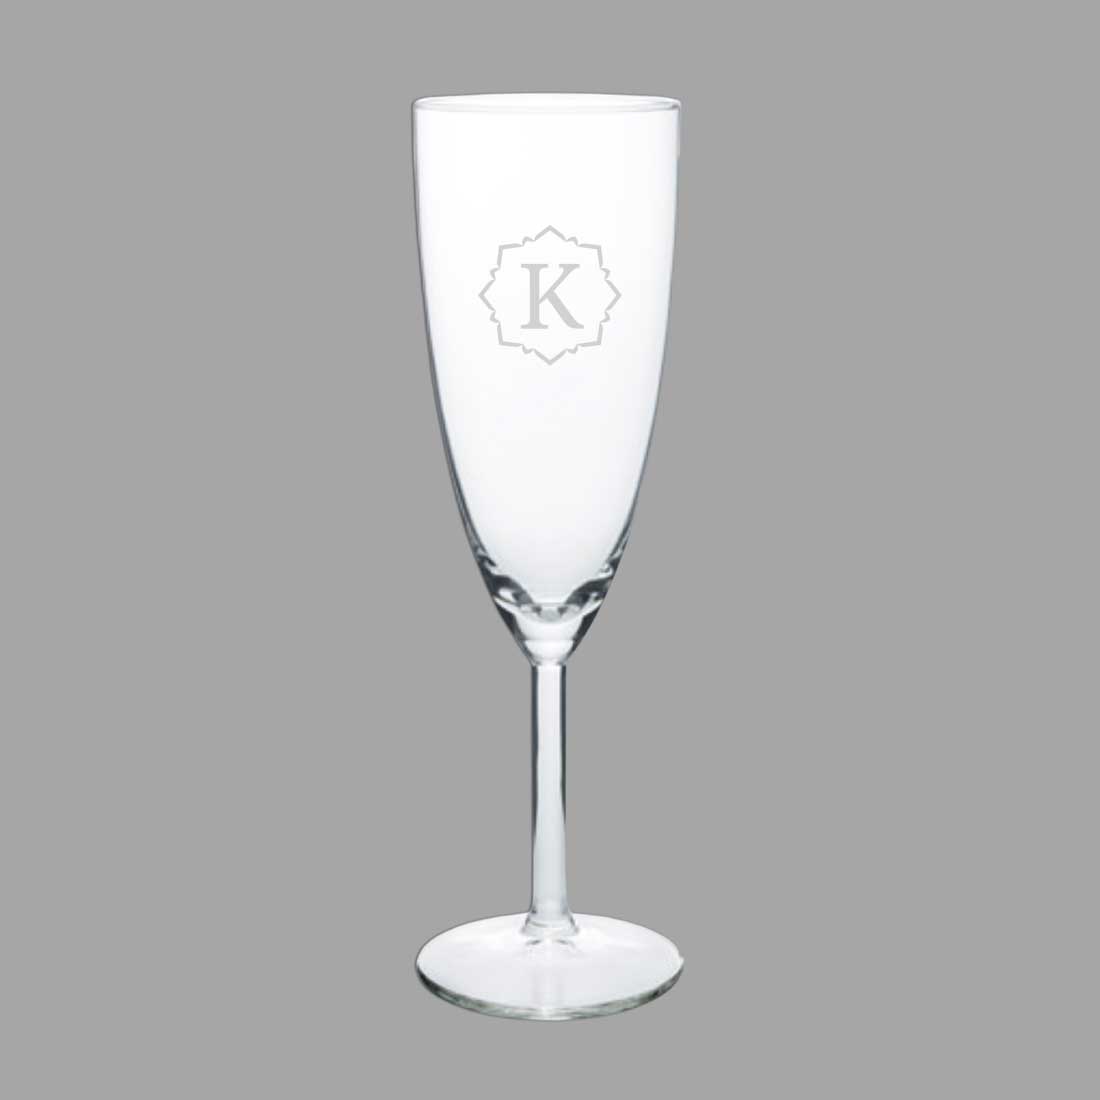 Champagne Glasses with Name - Personalized Engraved Flute Glasses